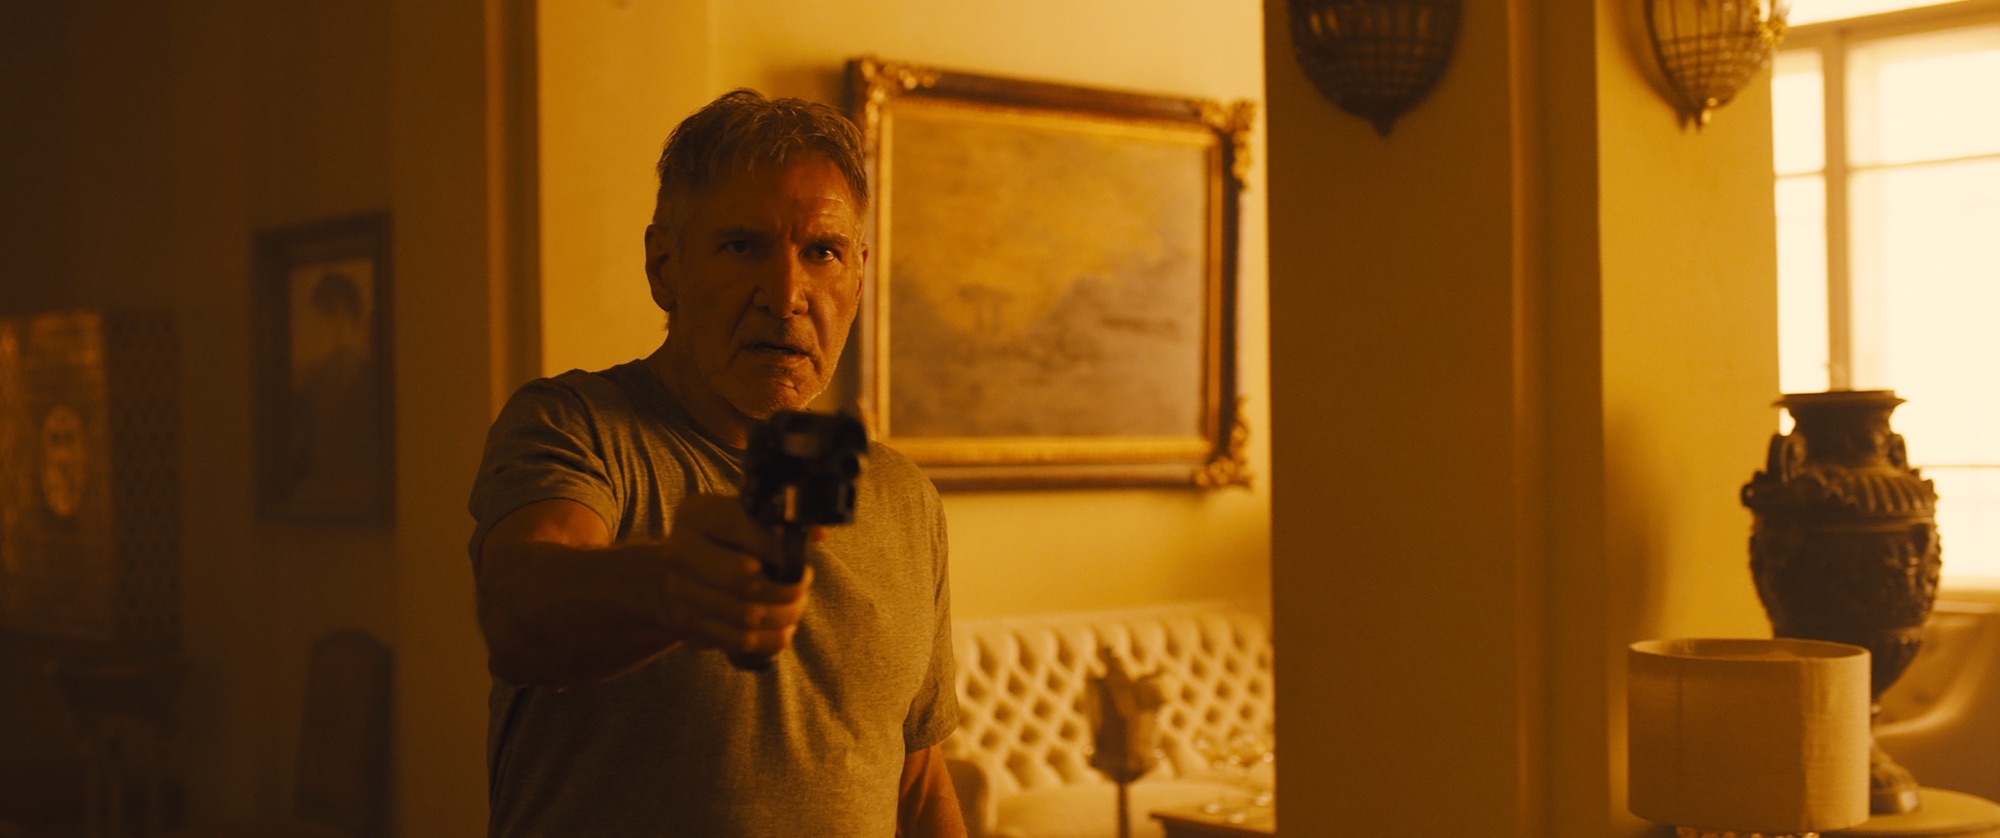 Harrison Ford in Blade Runner 2049 in association with Columbia Pictures, domestic distribution by Warner Bros. Pictures and international distribution by Sony Pictures Releasing International.